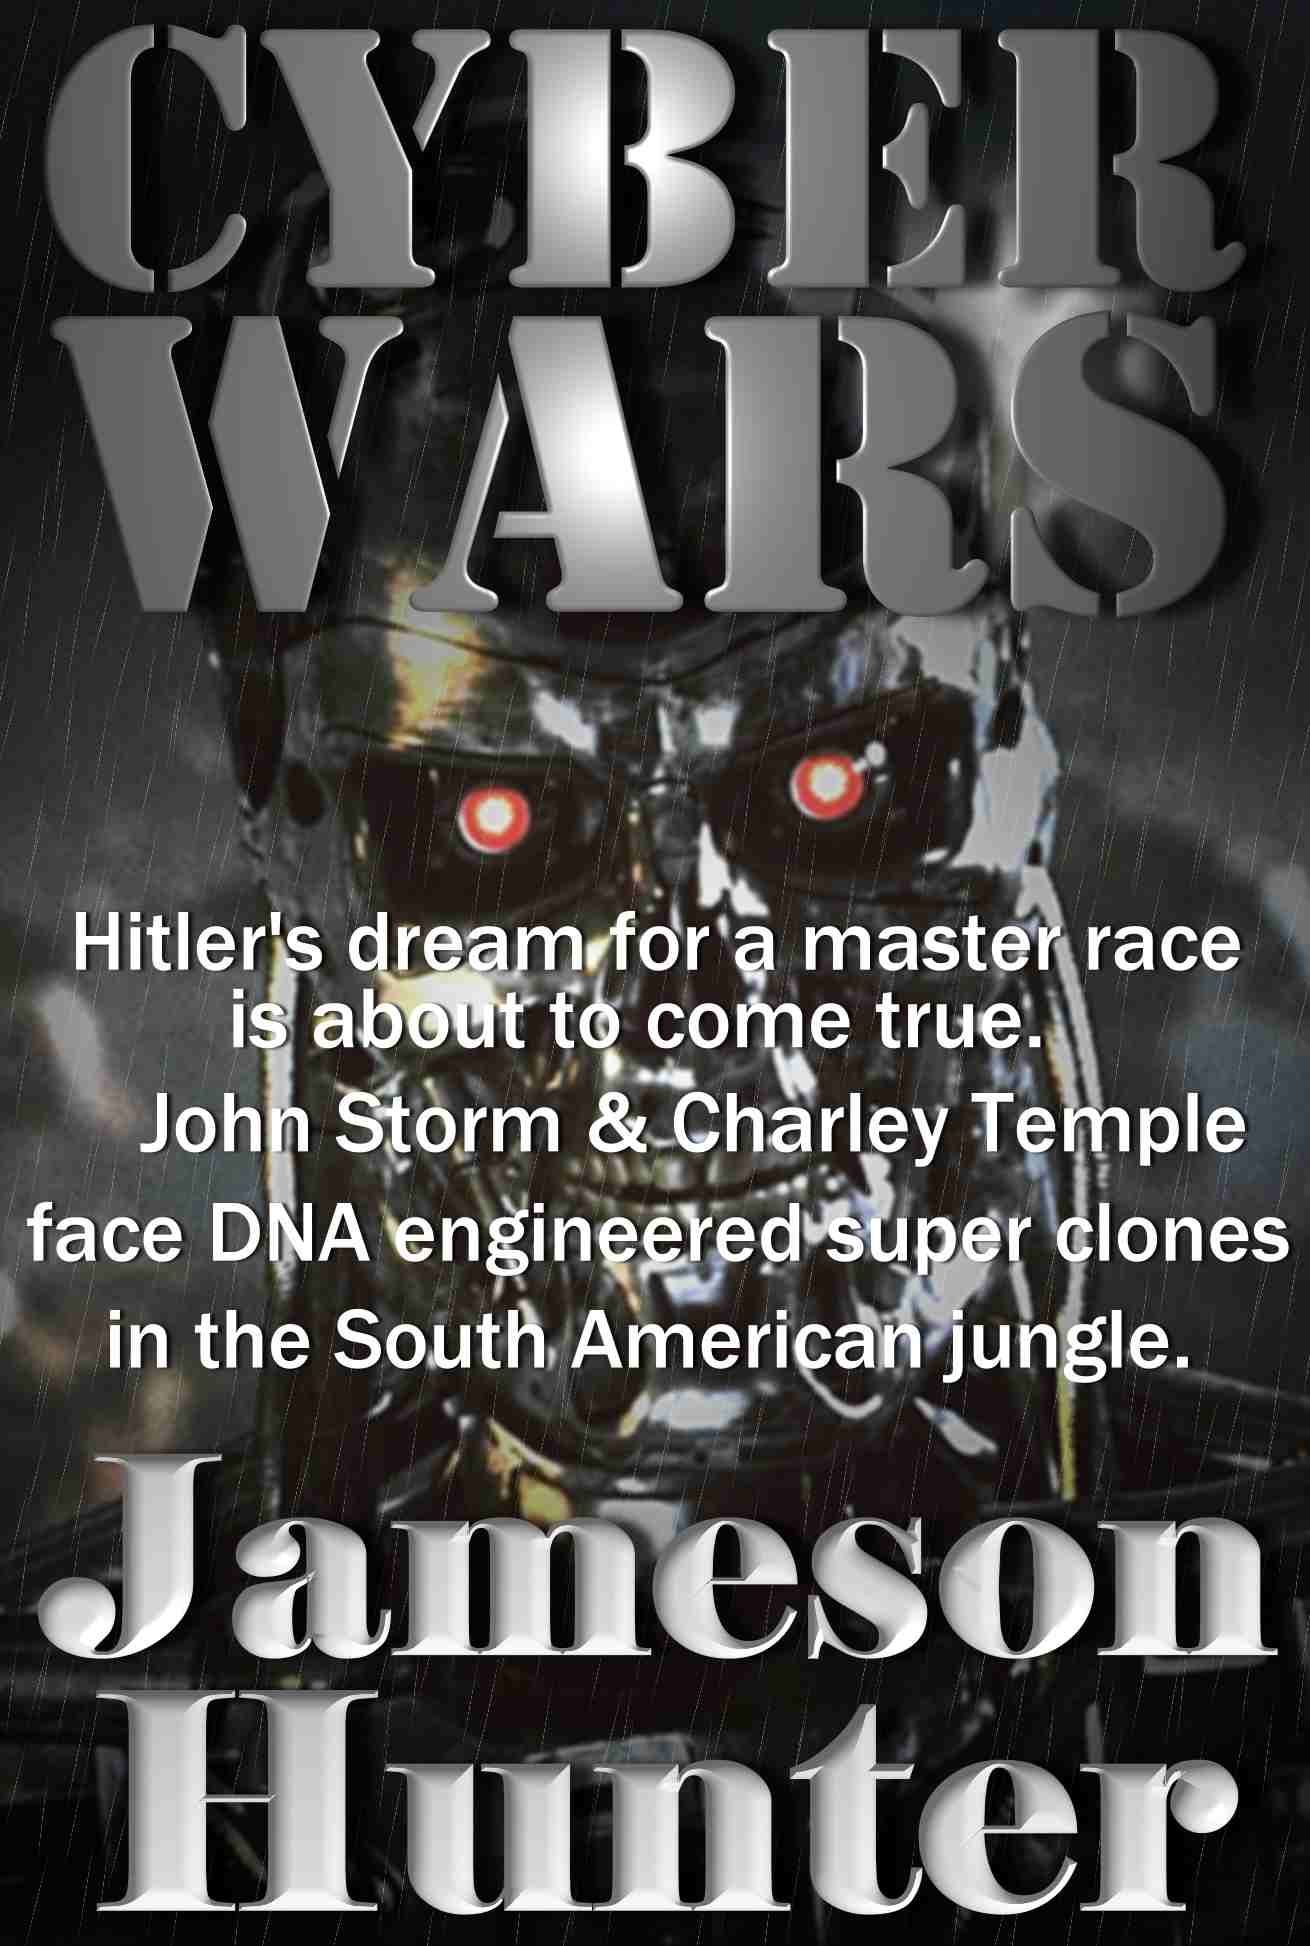 Cyber Wars, the fourth reich and master race, warfare